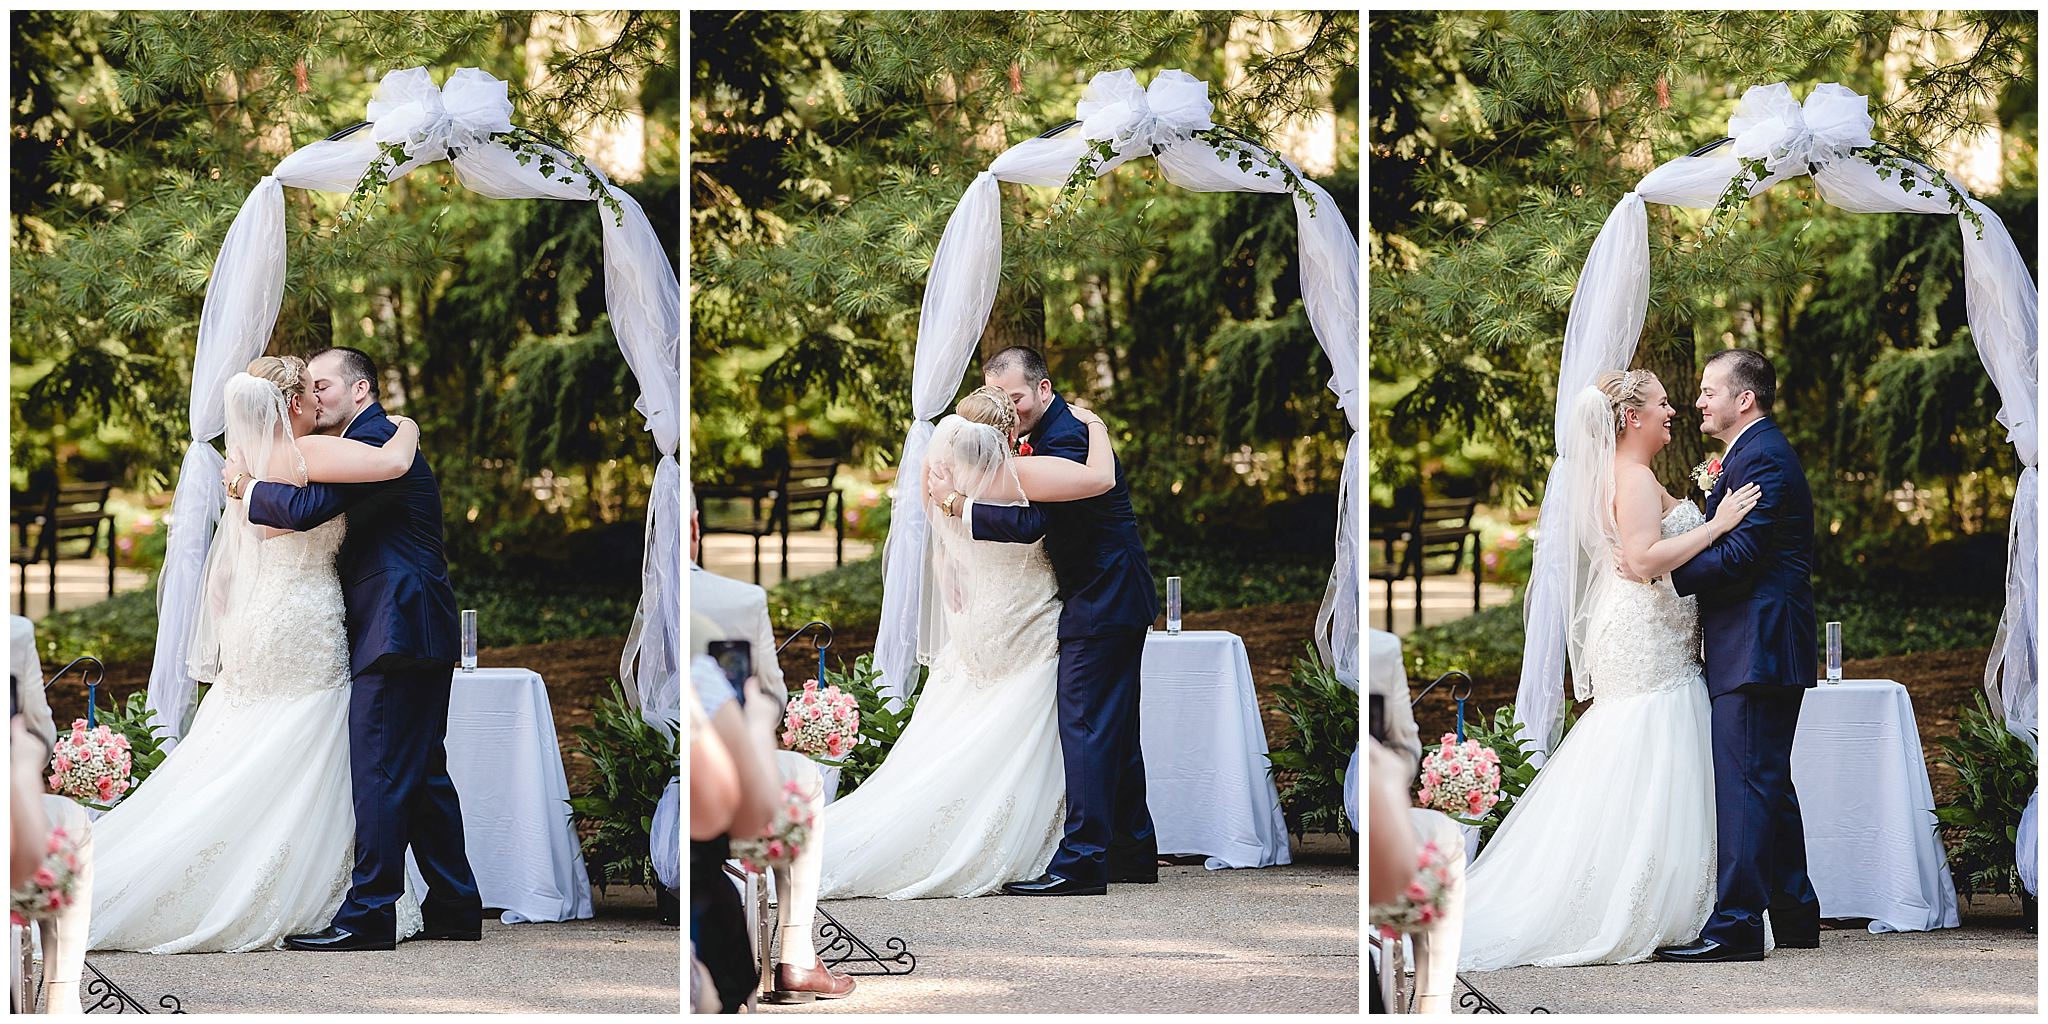 Bride and groom share a first kiss at their outdoor wedding ceremony